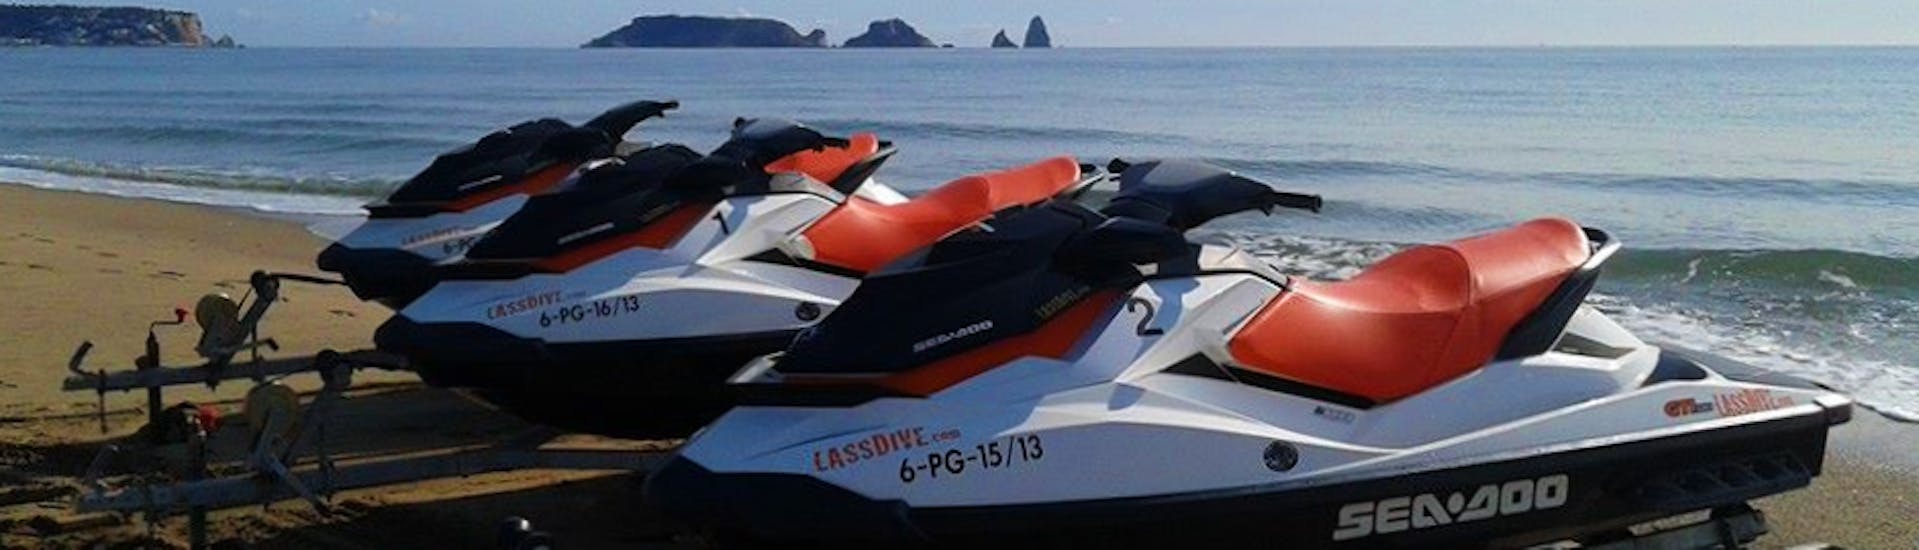 Some of our jet skis are ready for our Jet Ski Safari along the Palamós Coast and Calonge with Lassdive.